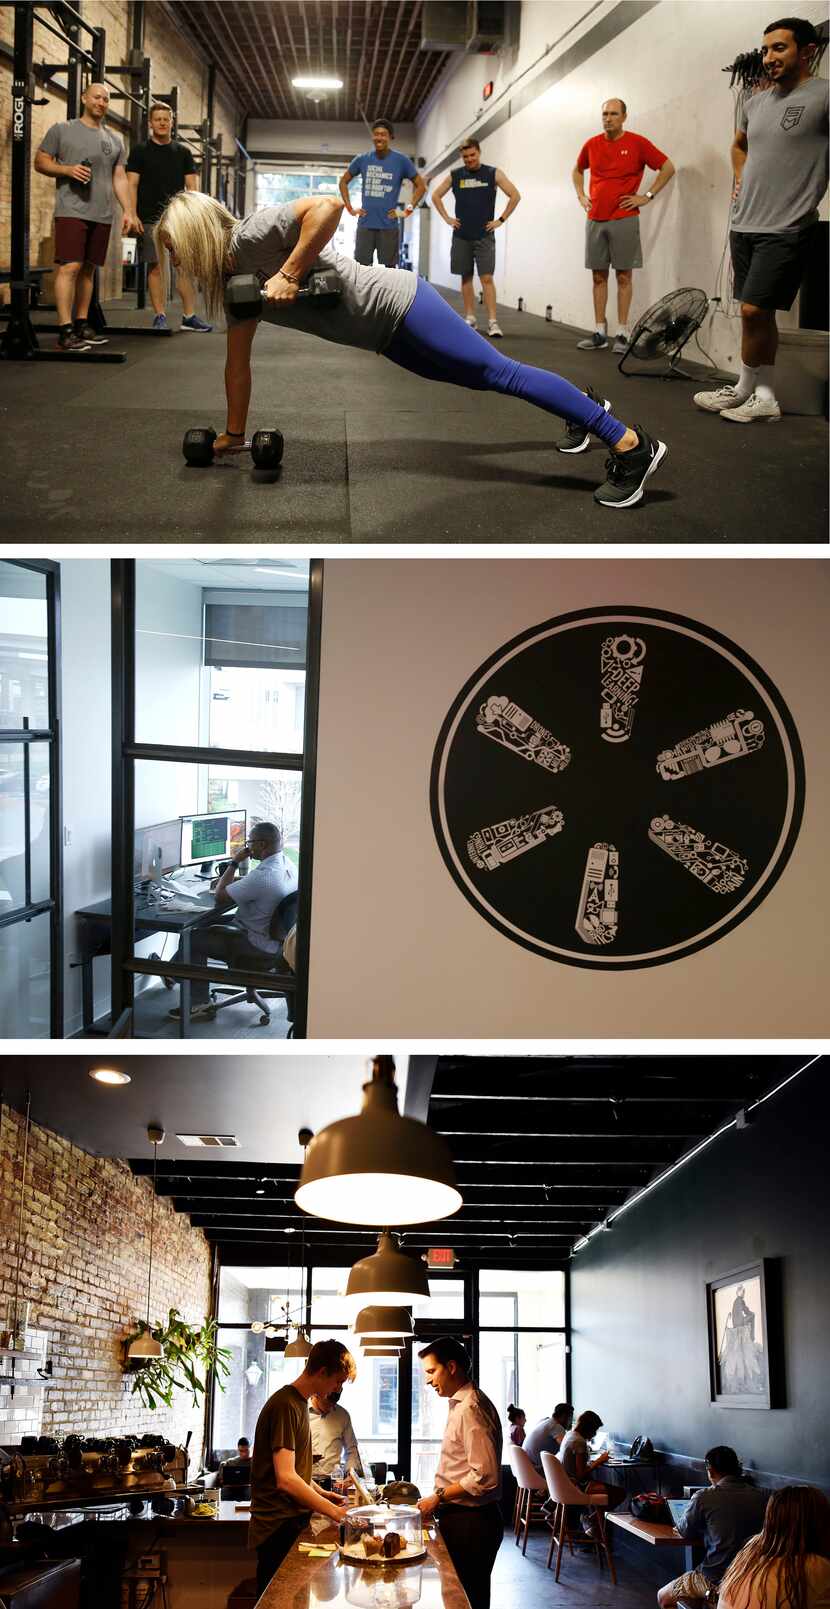 Nick Clark, founder of Dallas-based Common Desk, now owns the gym Social Mechanics (from...